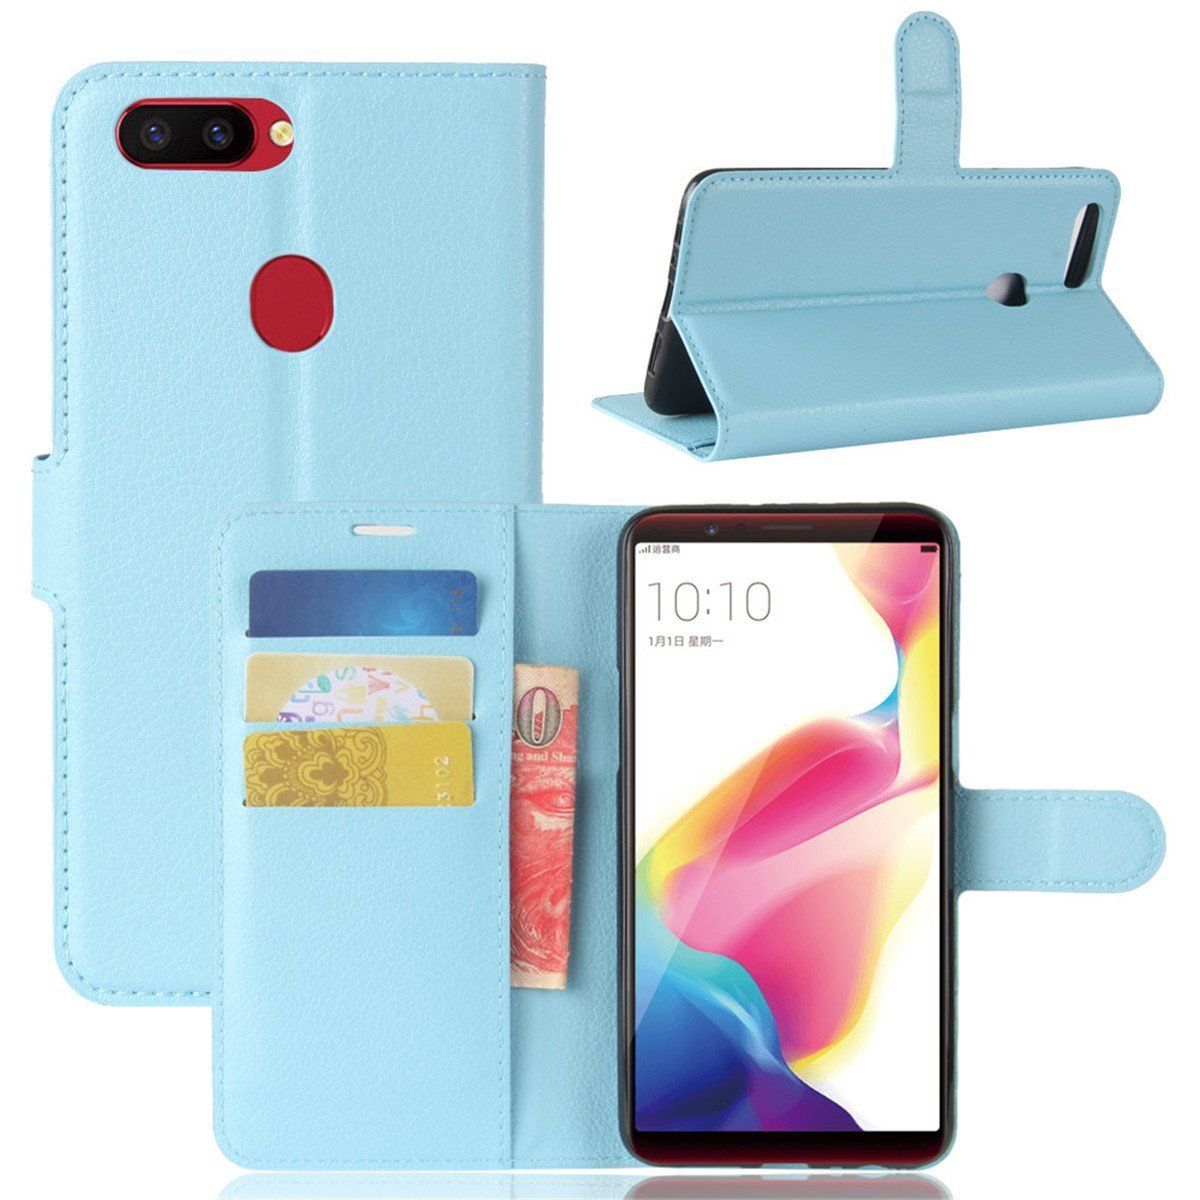 Oppo A73/F5 Premium Leather Wallet Case Cover For Oppo Case-Sky Blue